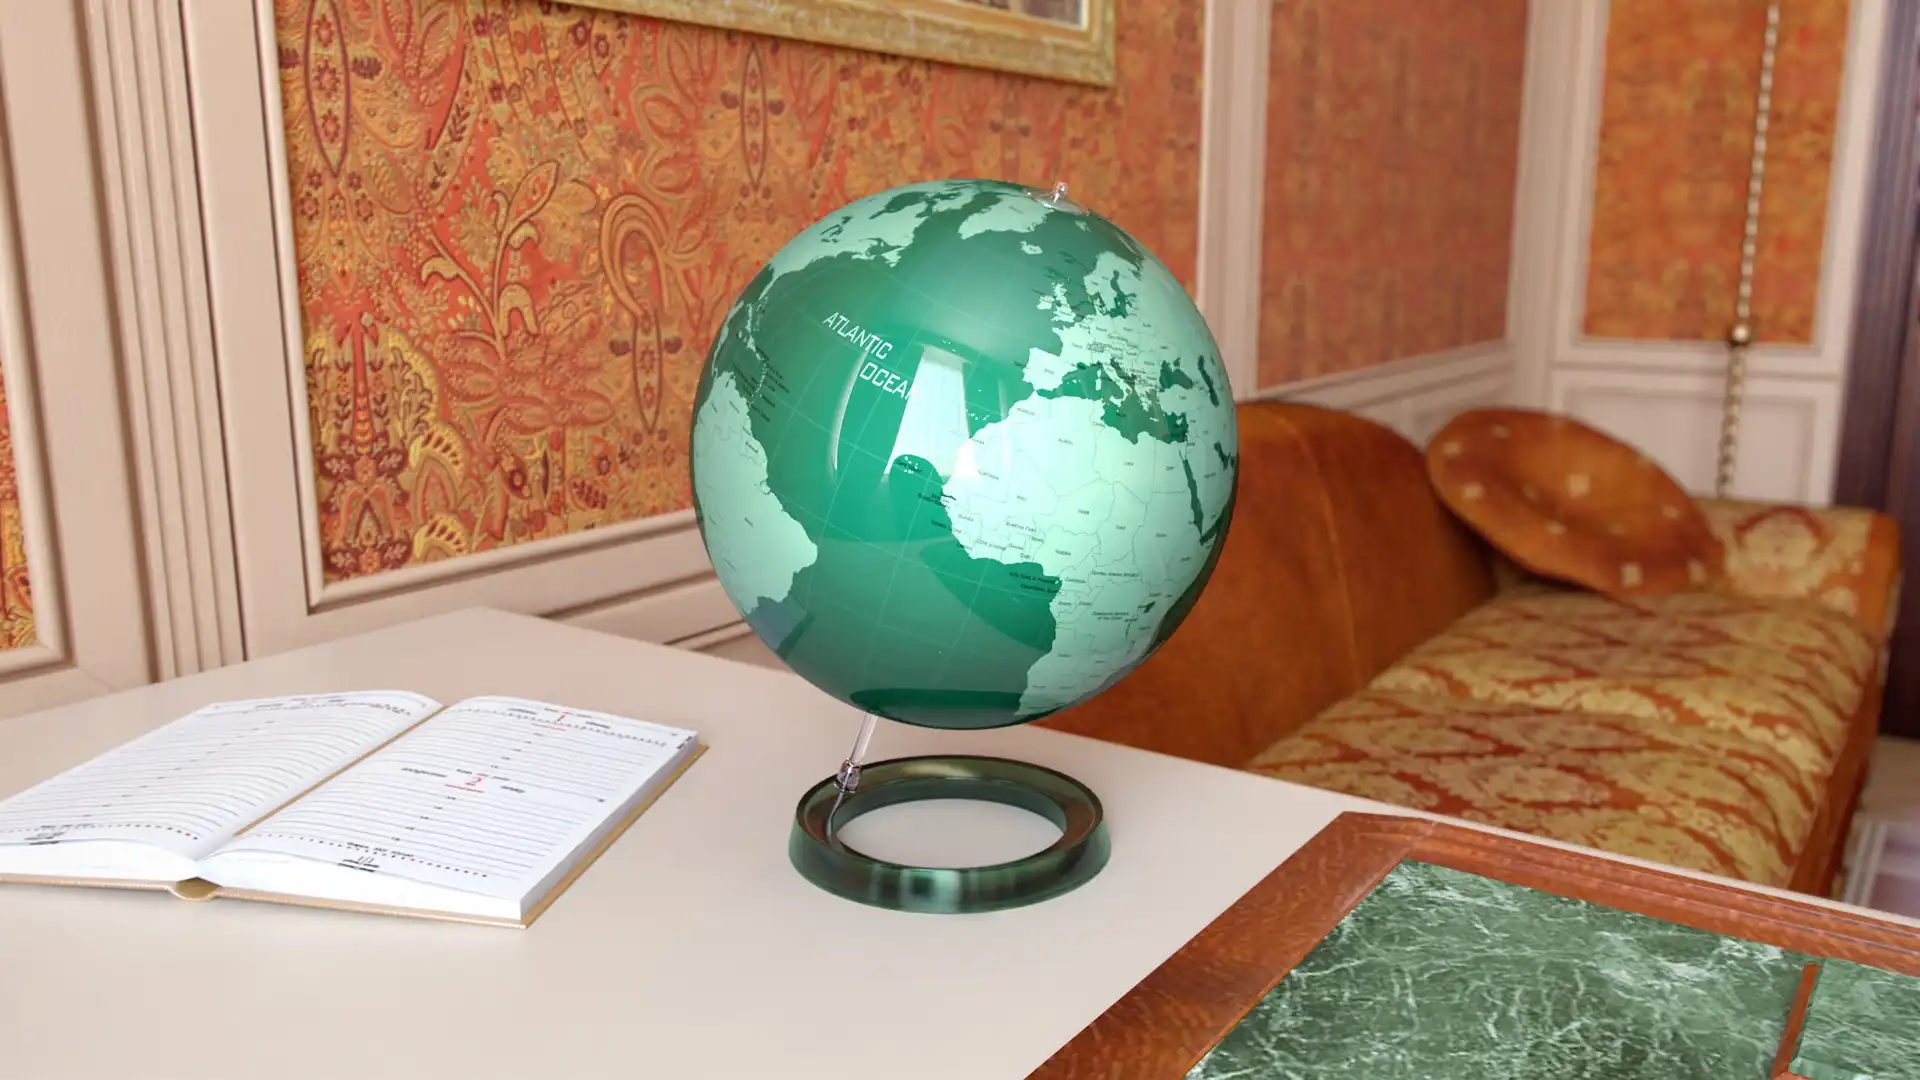 3d visualization example of a green acrylic globe 3d model in a classic interior.